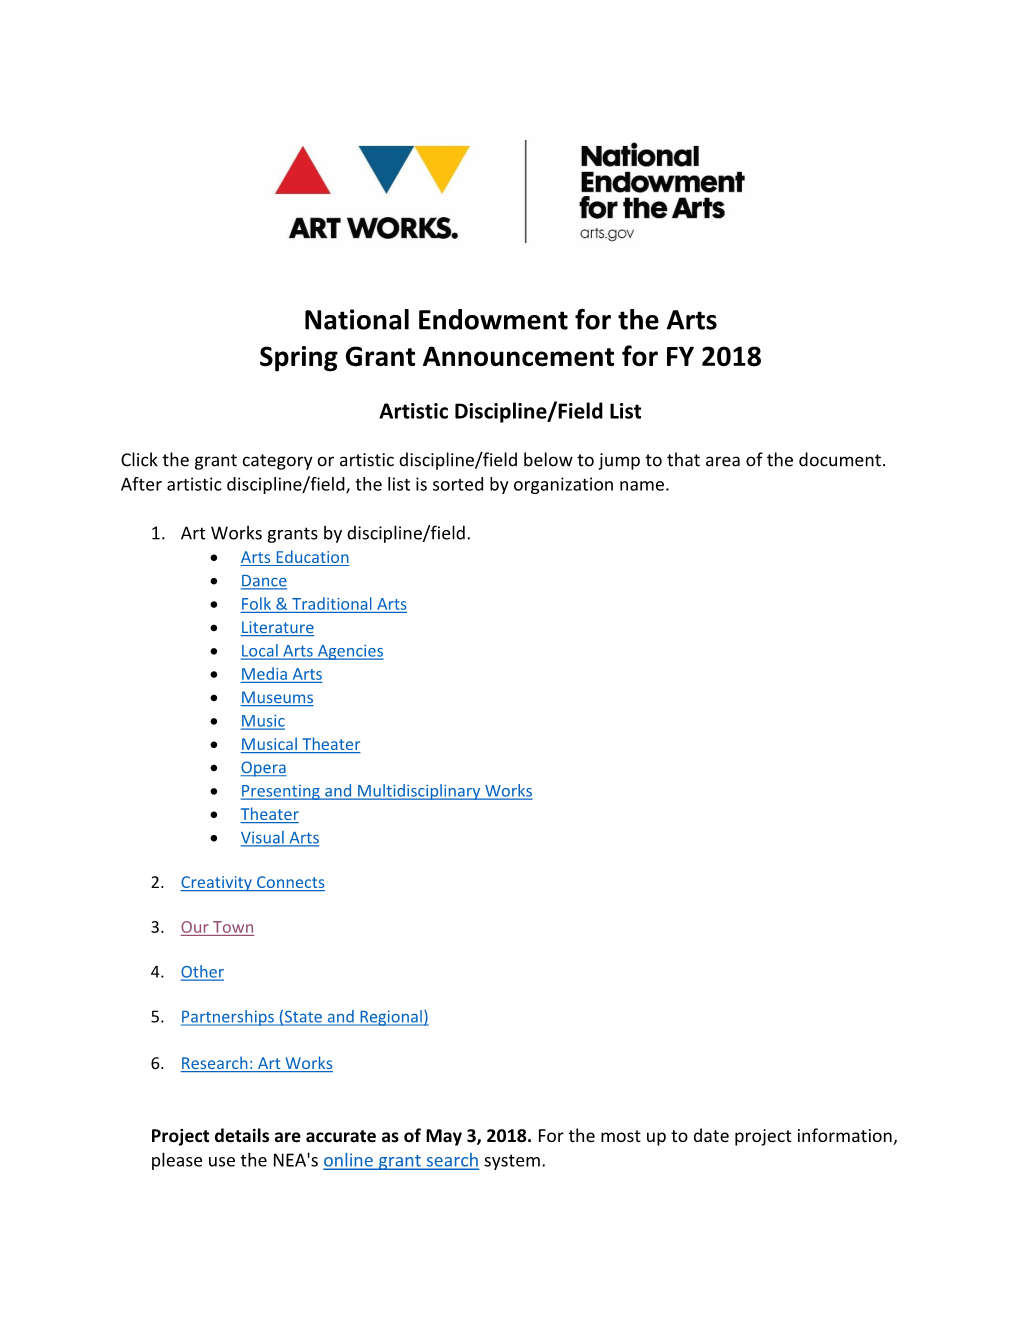 National Endowment for the Arts Spring Grant Announcement for FY 2018